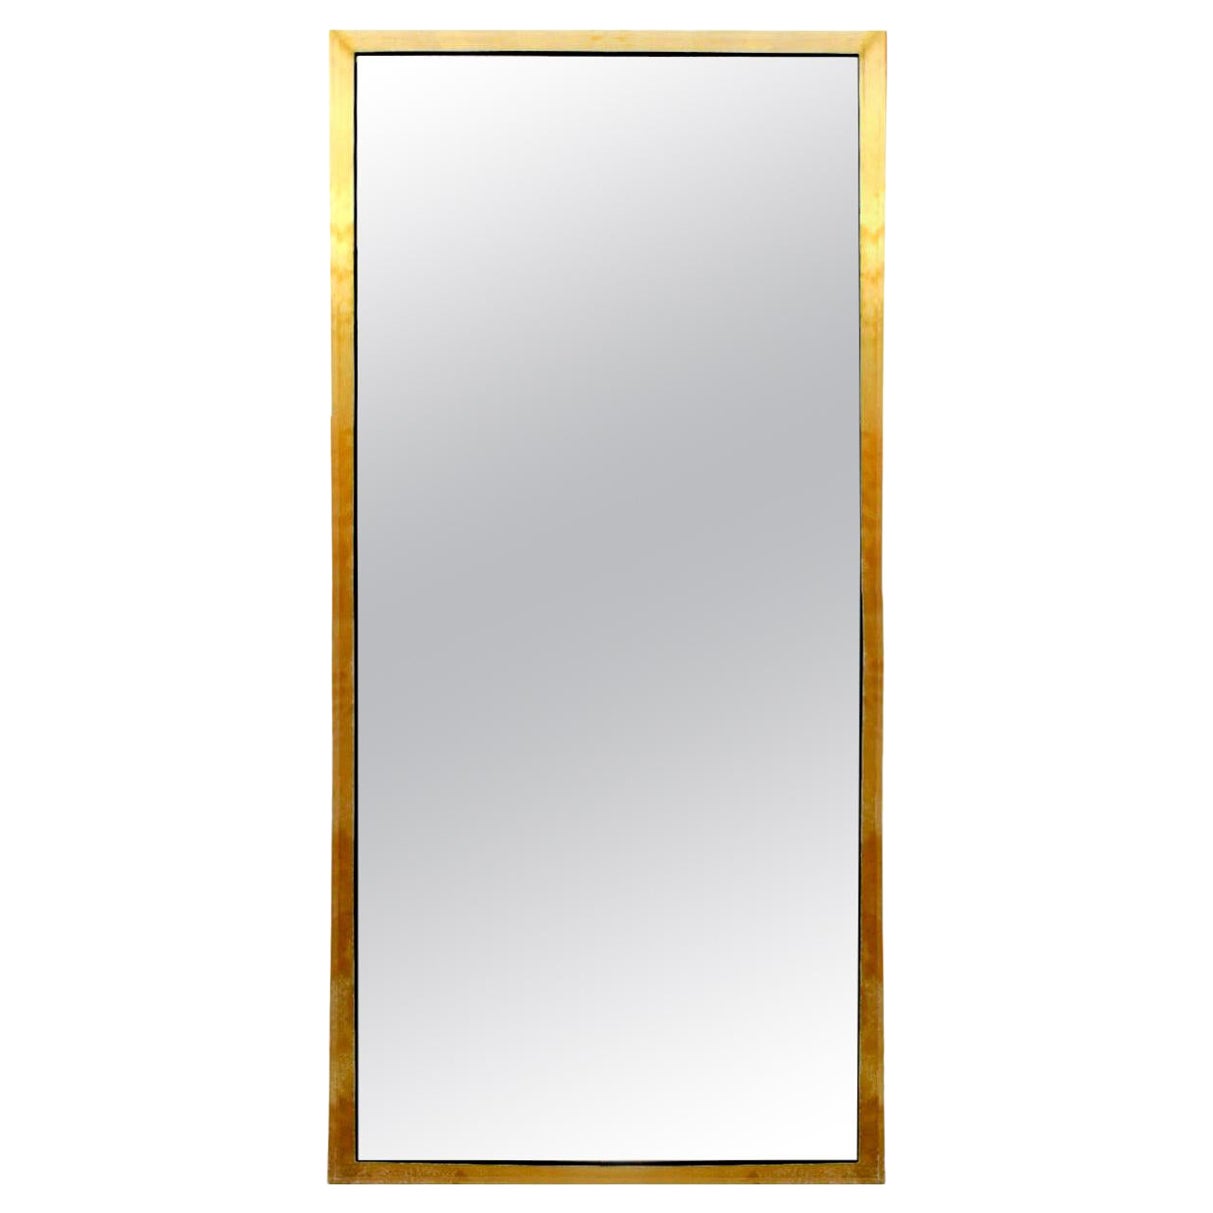 Vintage Model "Infinity" Large Made of Brass Italian Mirror, Ready